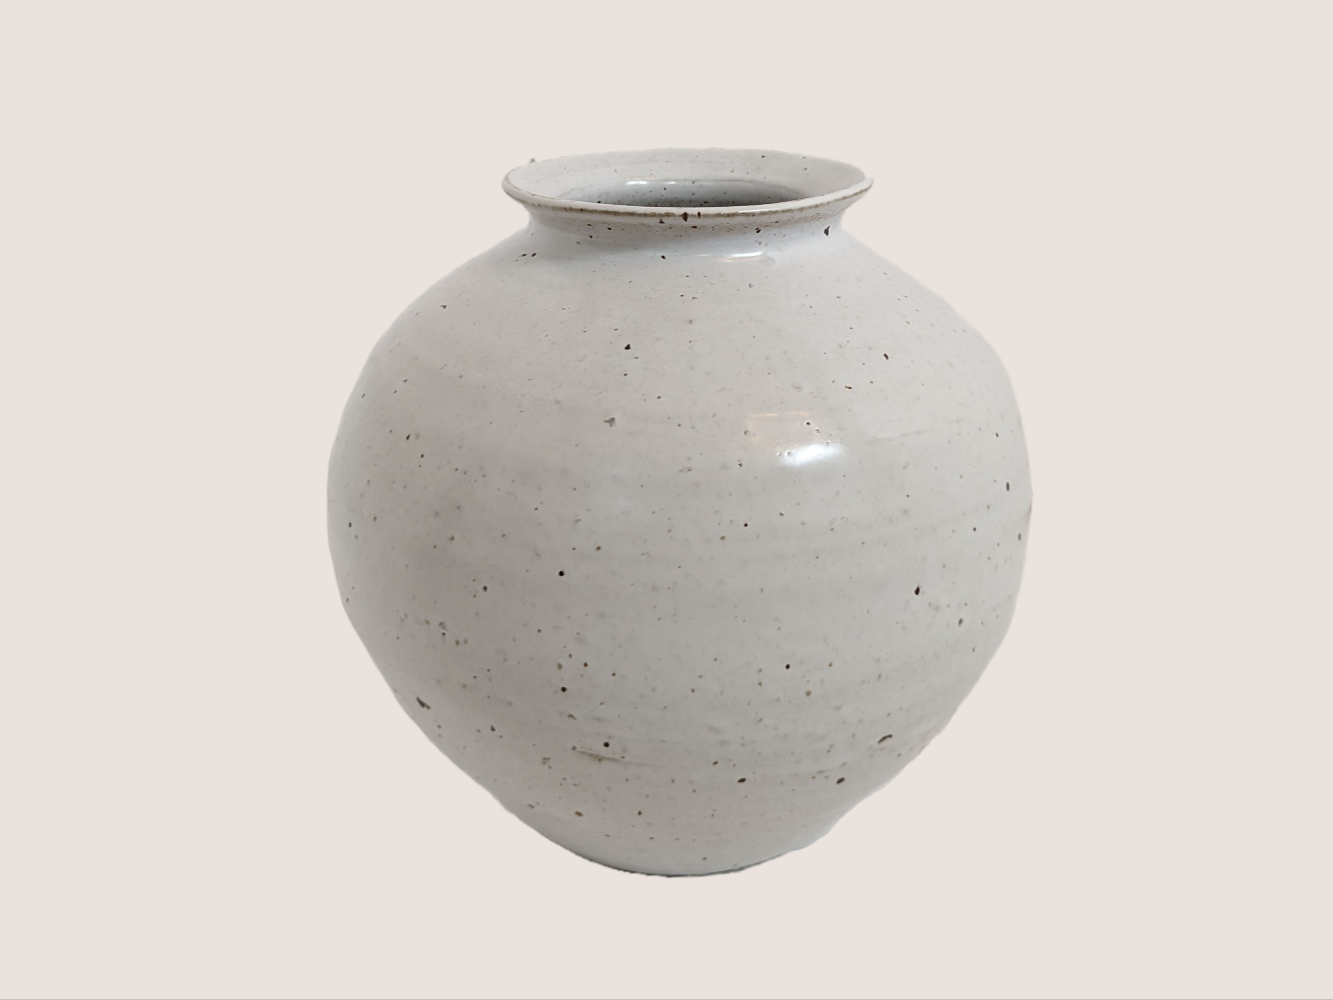 Ivory ceramic vase in round shape, 8 inches tall and 8 inches wide at largest width, with 3.5 inch vase opening. Brown and black speckles give it natural texture and look. 